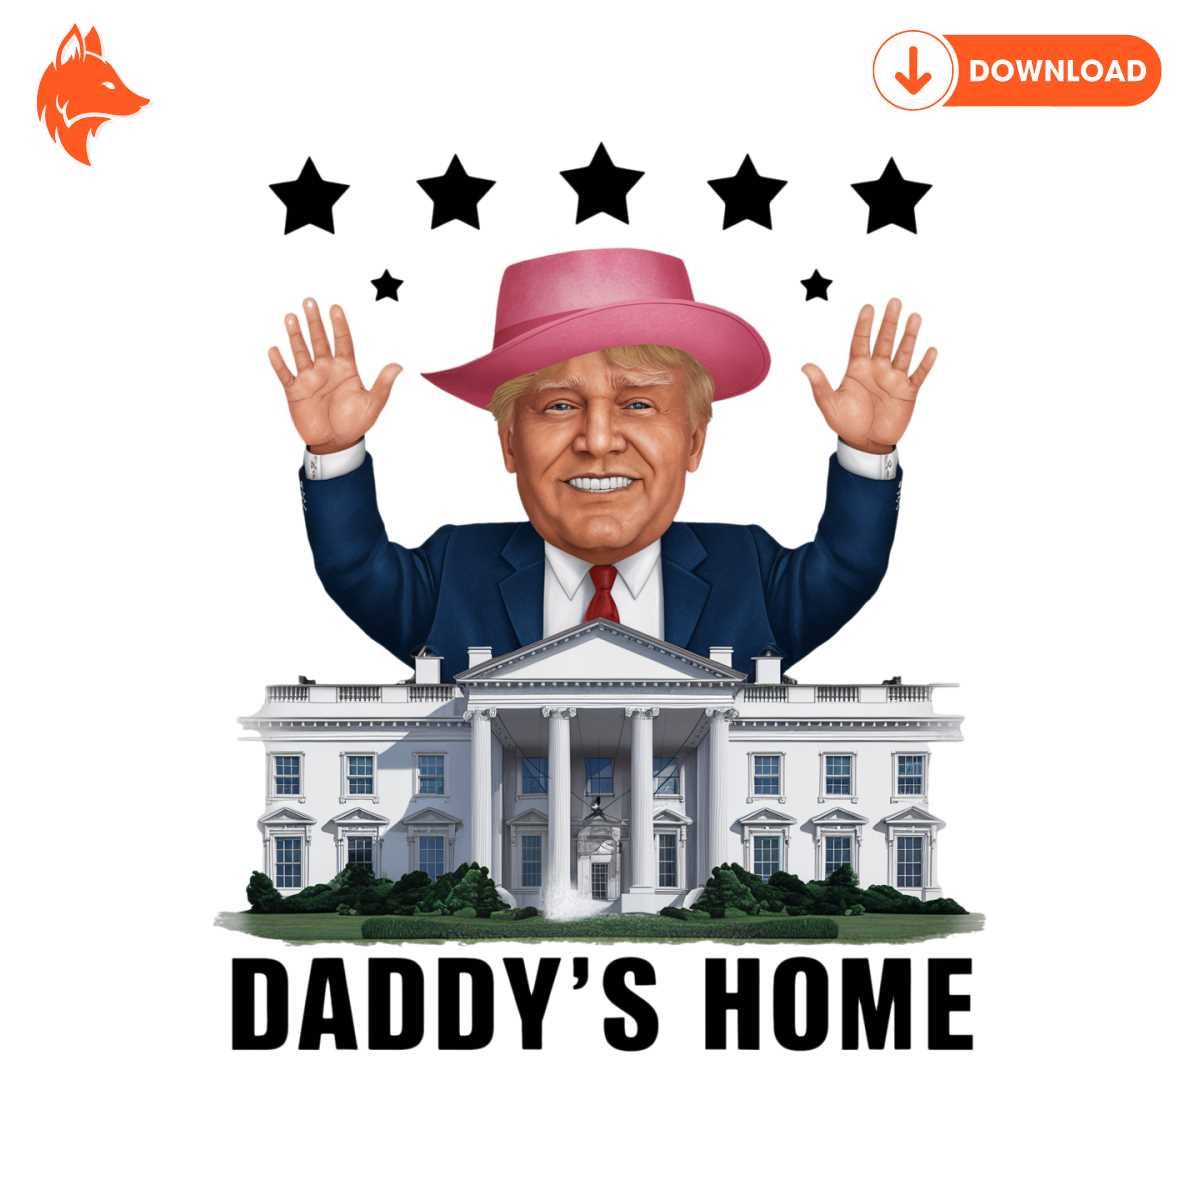 Free White House Daddys Home Trump Meme PNG